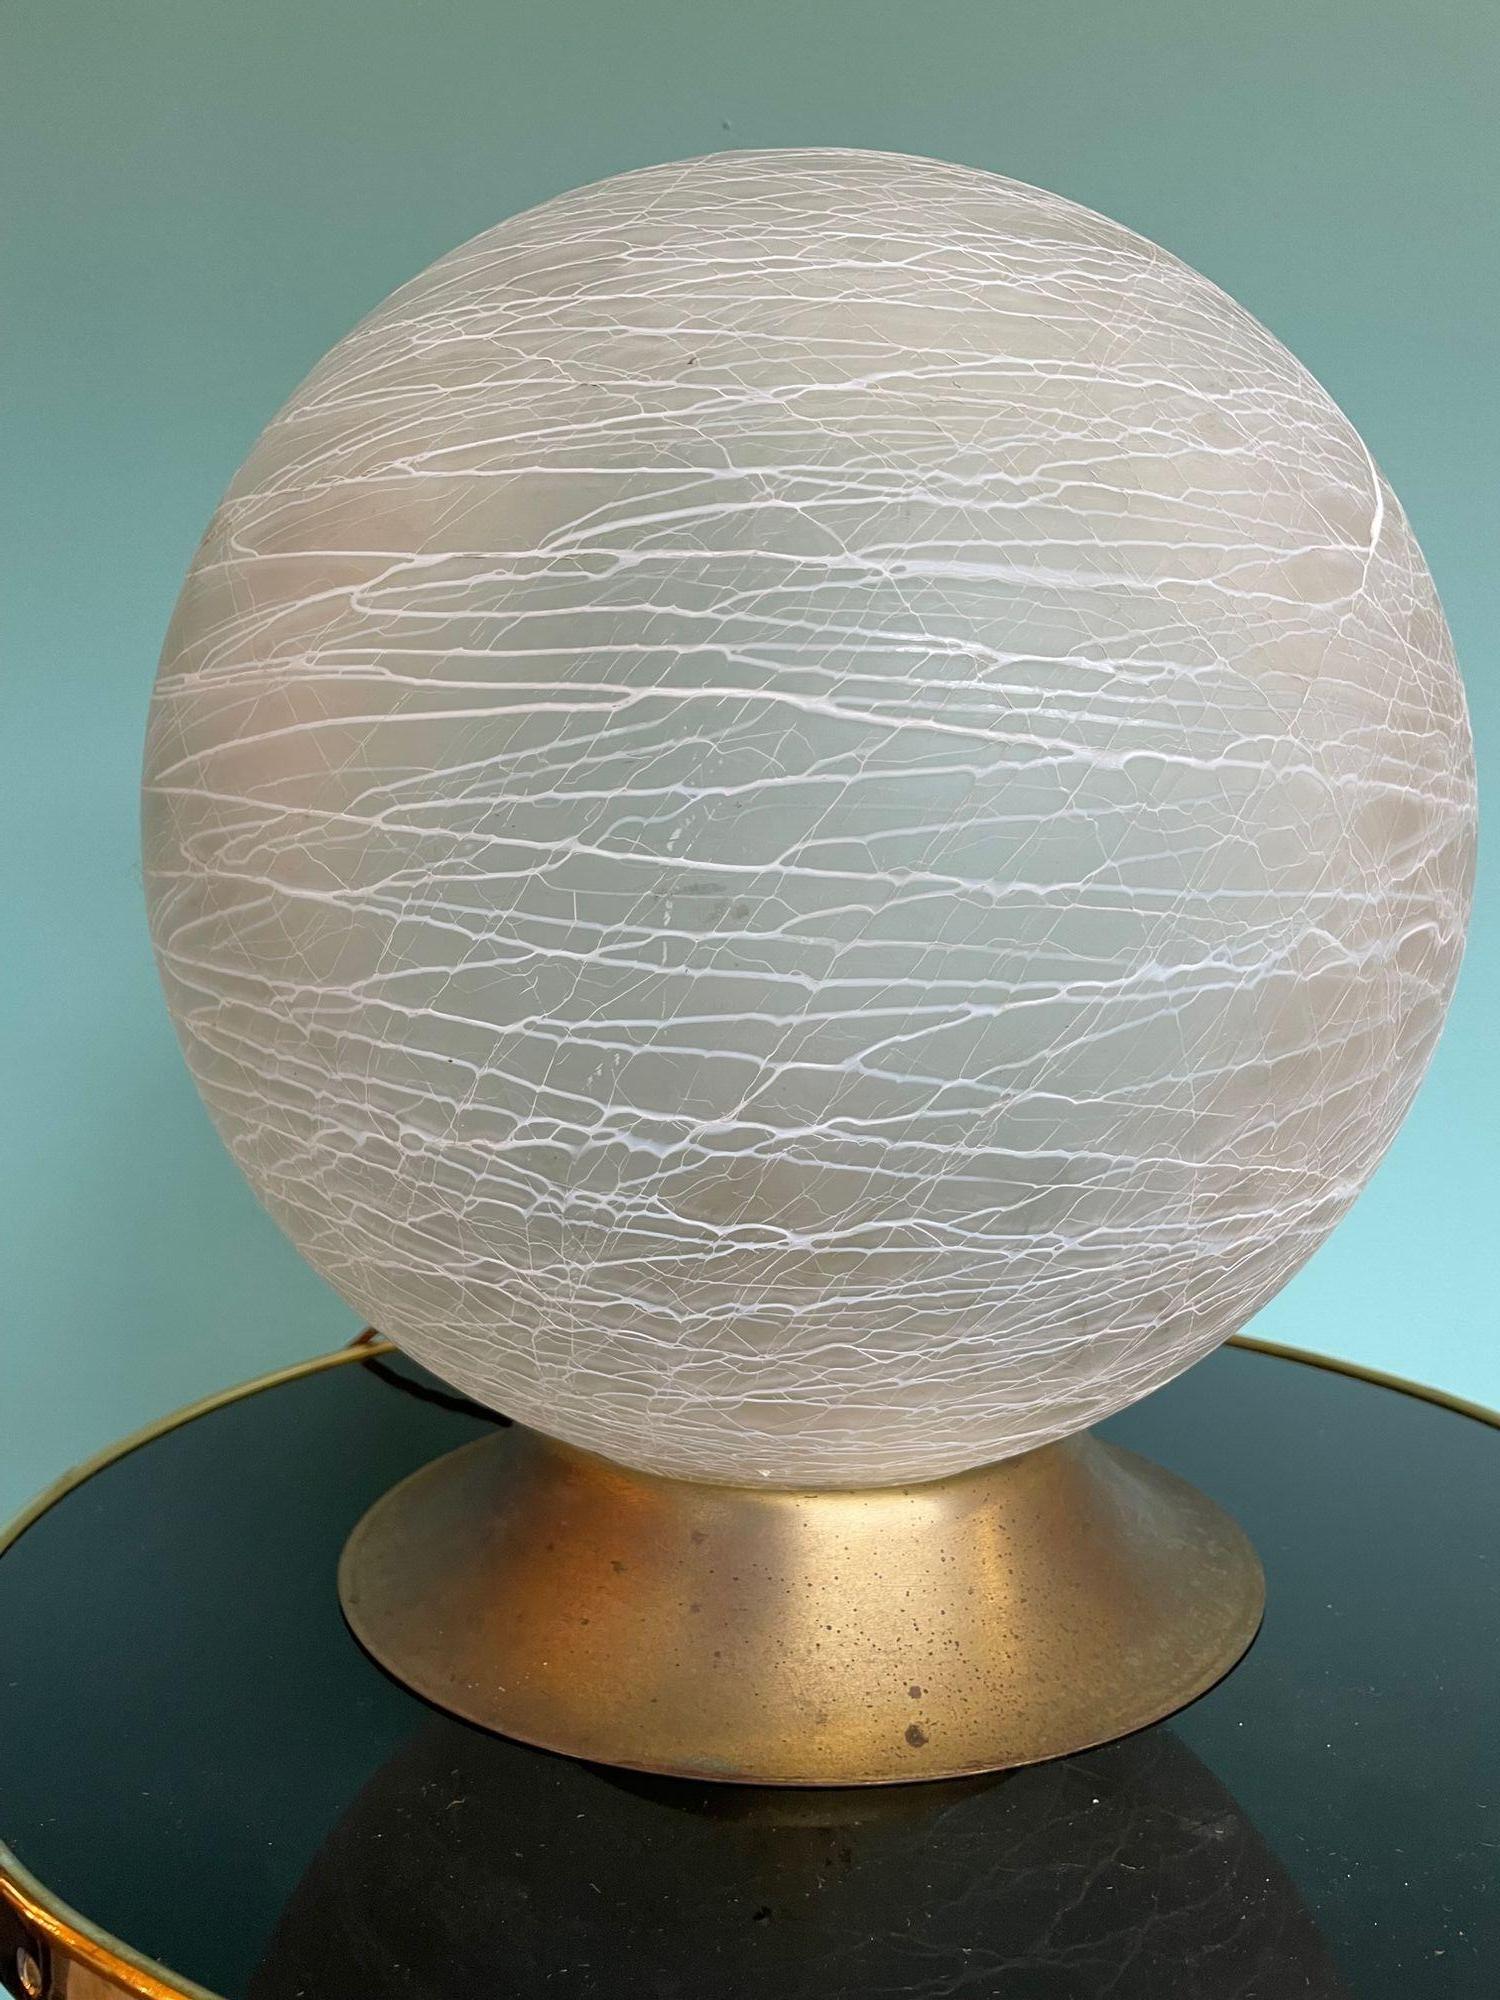 An Italian 1970s Venini Murano glass swirl ball lamp on brass base, re wired with new fittings, antique gold cord flex and switch.